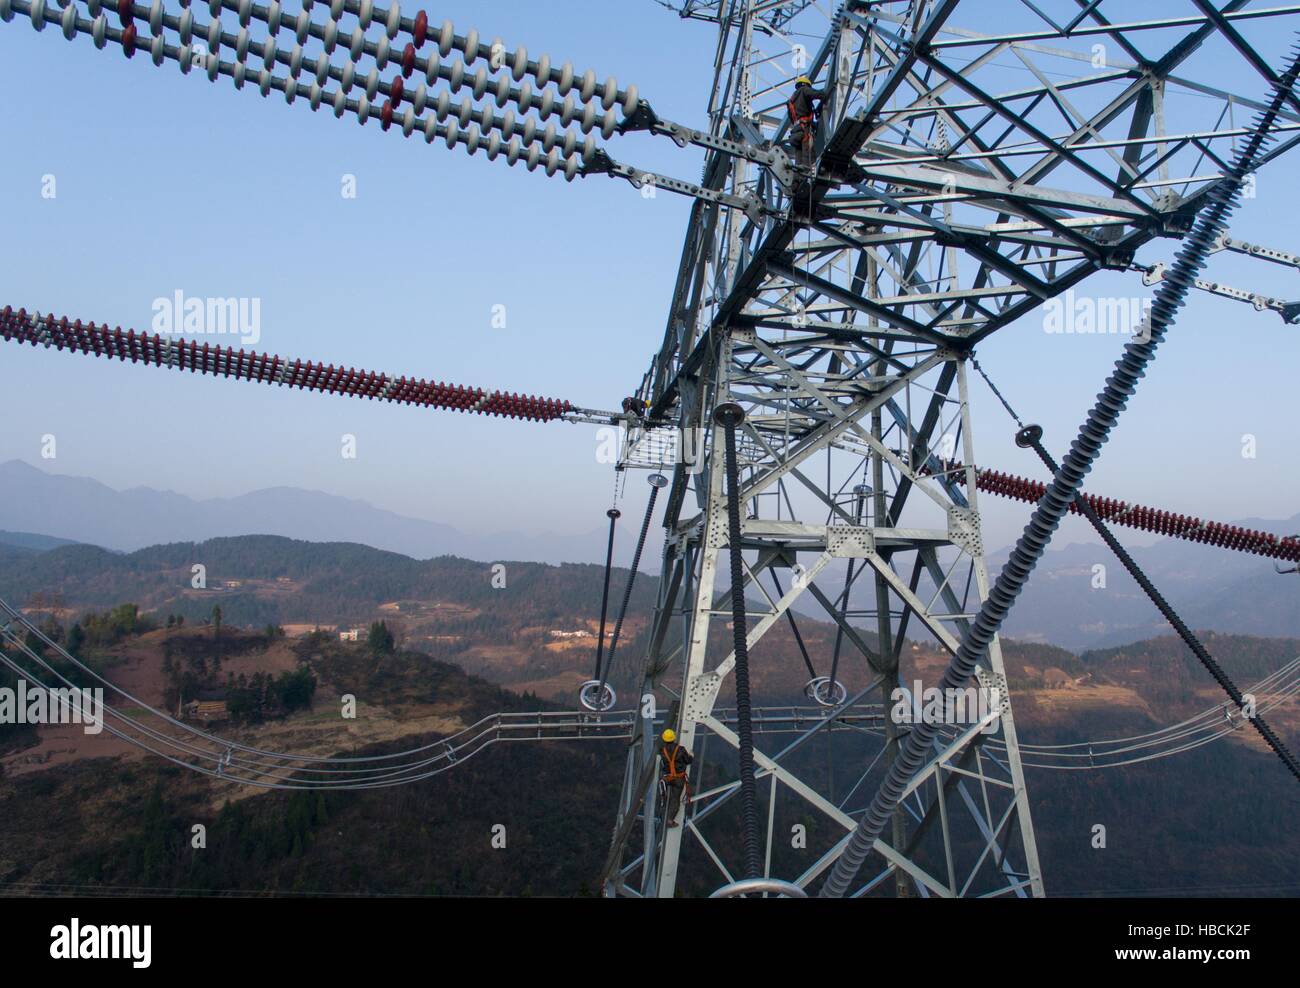 Chongqing. 6th Dec, 2016. Technicians inspect the tower of the ¡À800KV Ultra High Voltage (UHV) transmission line in Wushan County of southwest China's Chongqing, Dec. 6, 2016. The ¡À800KV UHV transmission line will run 2,383 meters from Jiuquan in northwest China's Gansu Province to Xiangtan in central China's Hunan Province. It's so far the longest transmission line of its kind in China. © Liu Chan/Xinhua/Alamy Live News Stock Photo